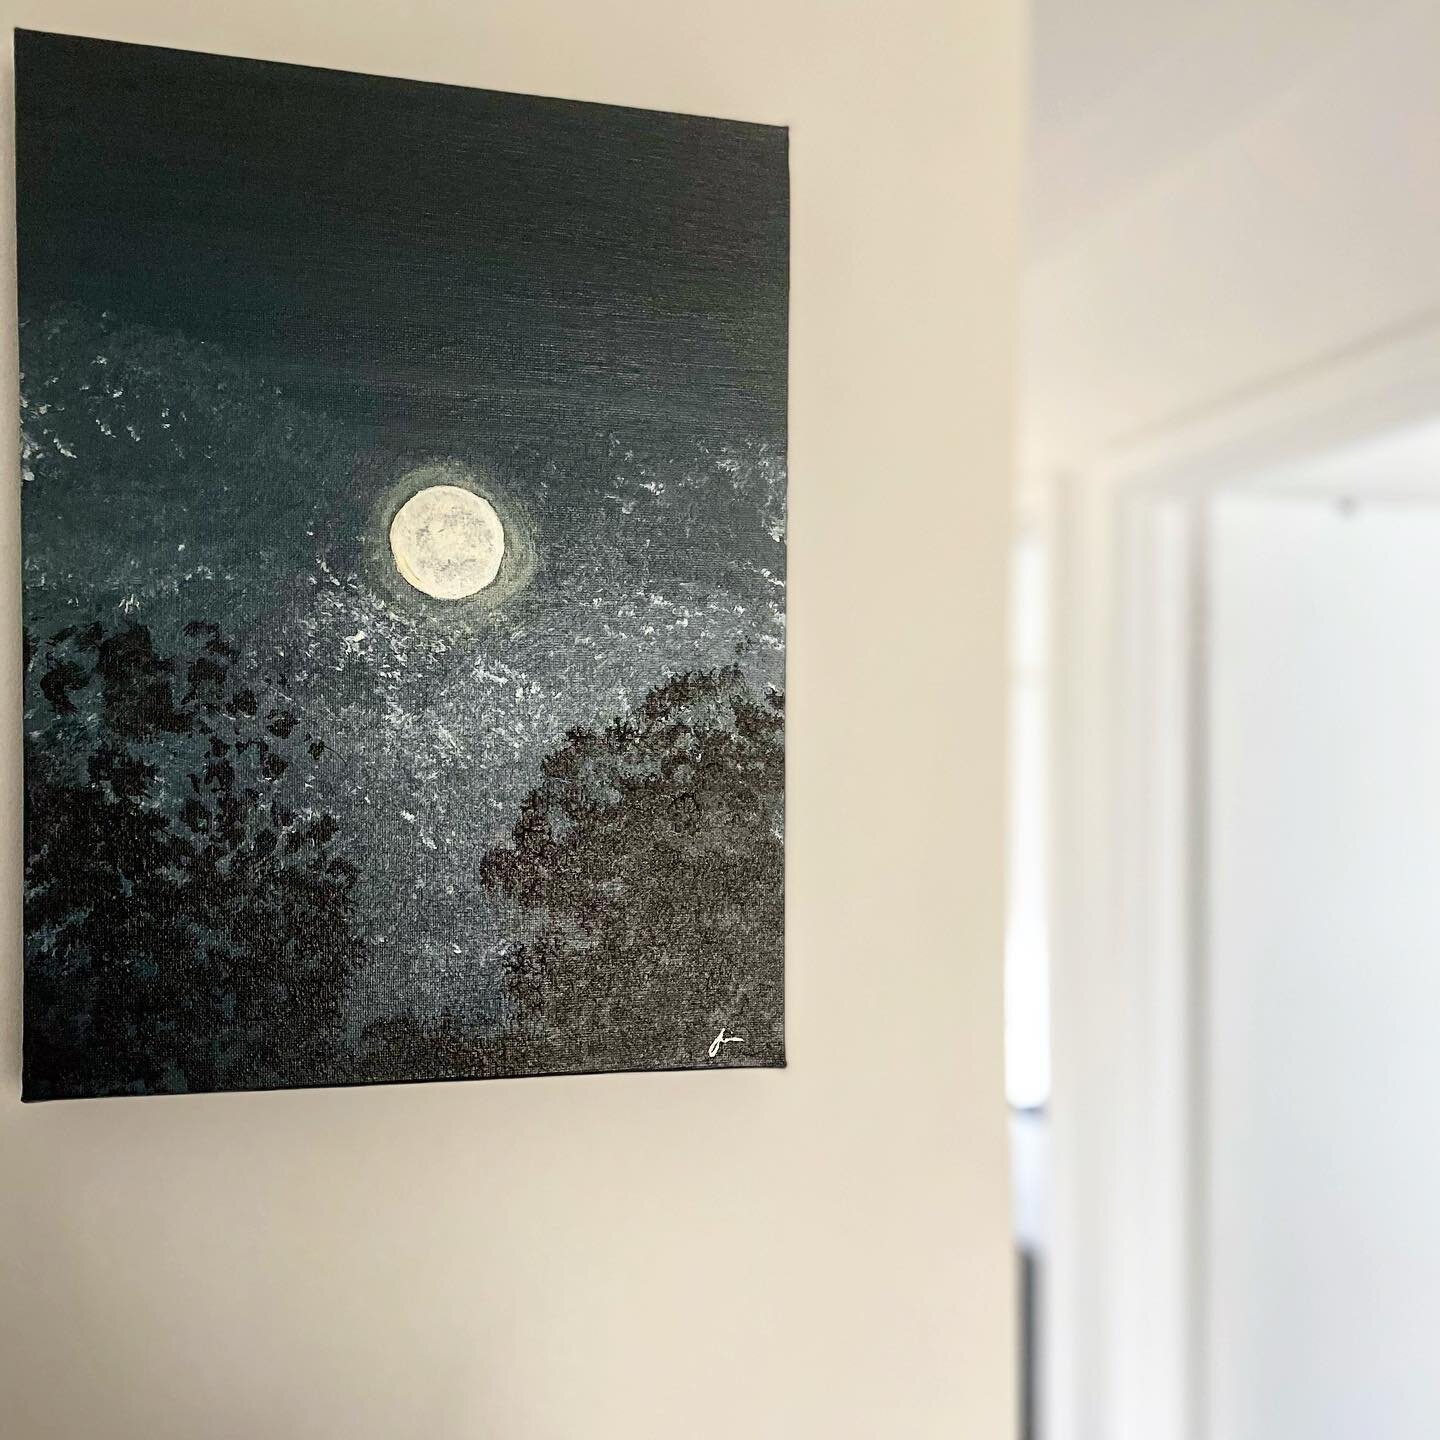 Moon ~ did anyone see the pink moon last month?
It was so bright I thought I had left the outdoor light on before going to bed. I stared outside for about 30 min in the cold just staring. It was mesmerizing.. now captured on the wall in our home. Tha